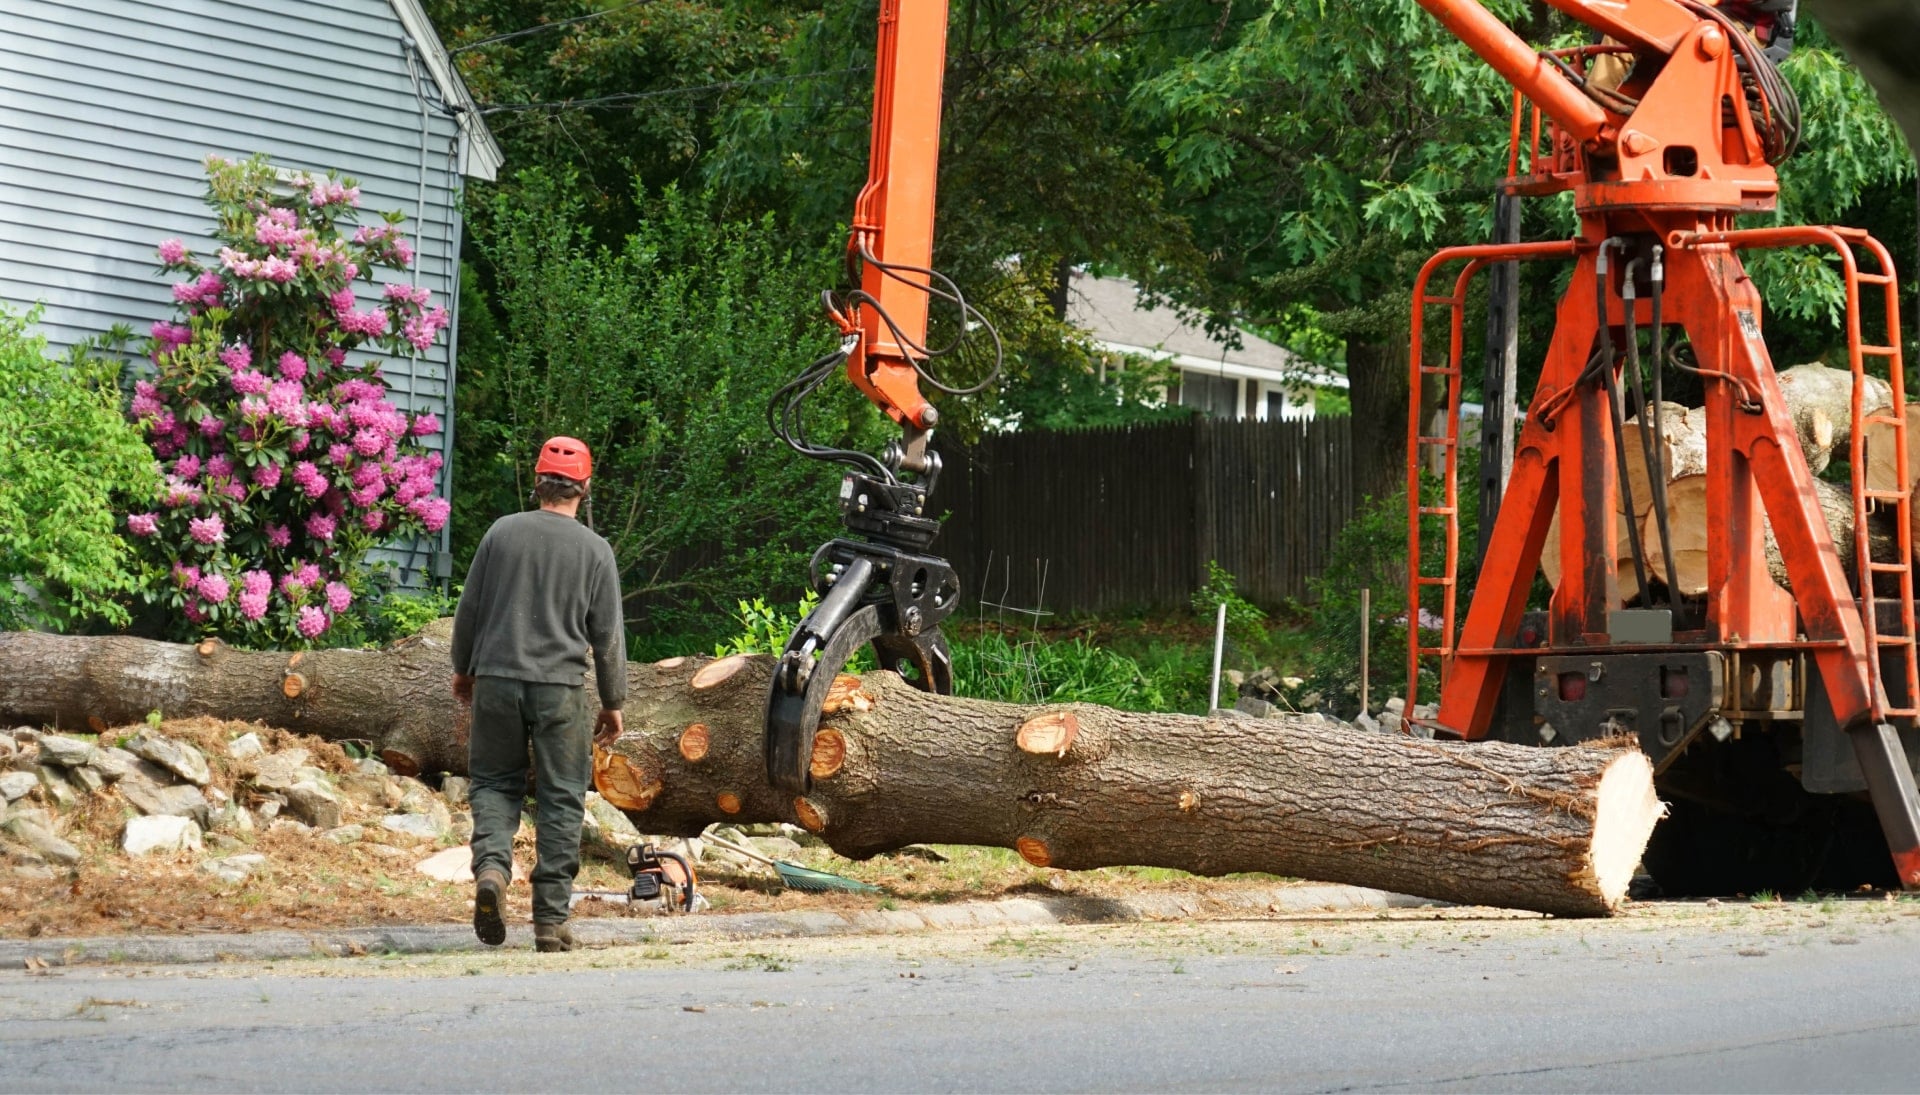 Local partner for Tree removal services in Gardendale